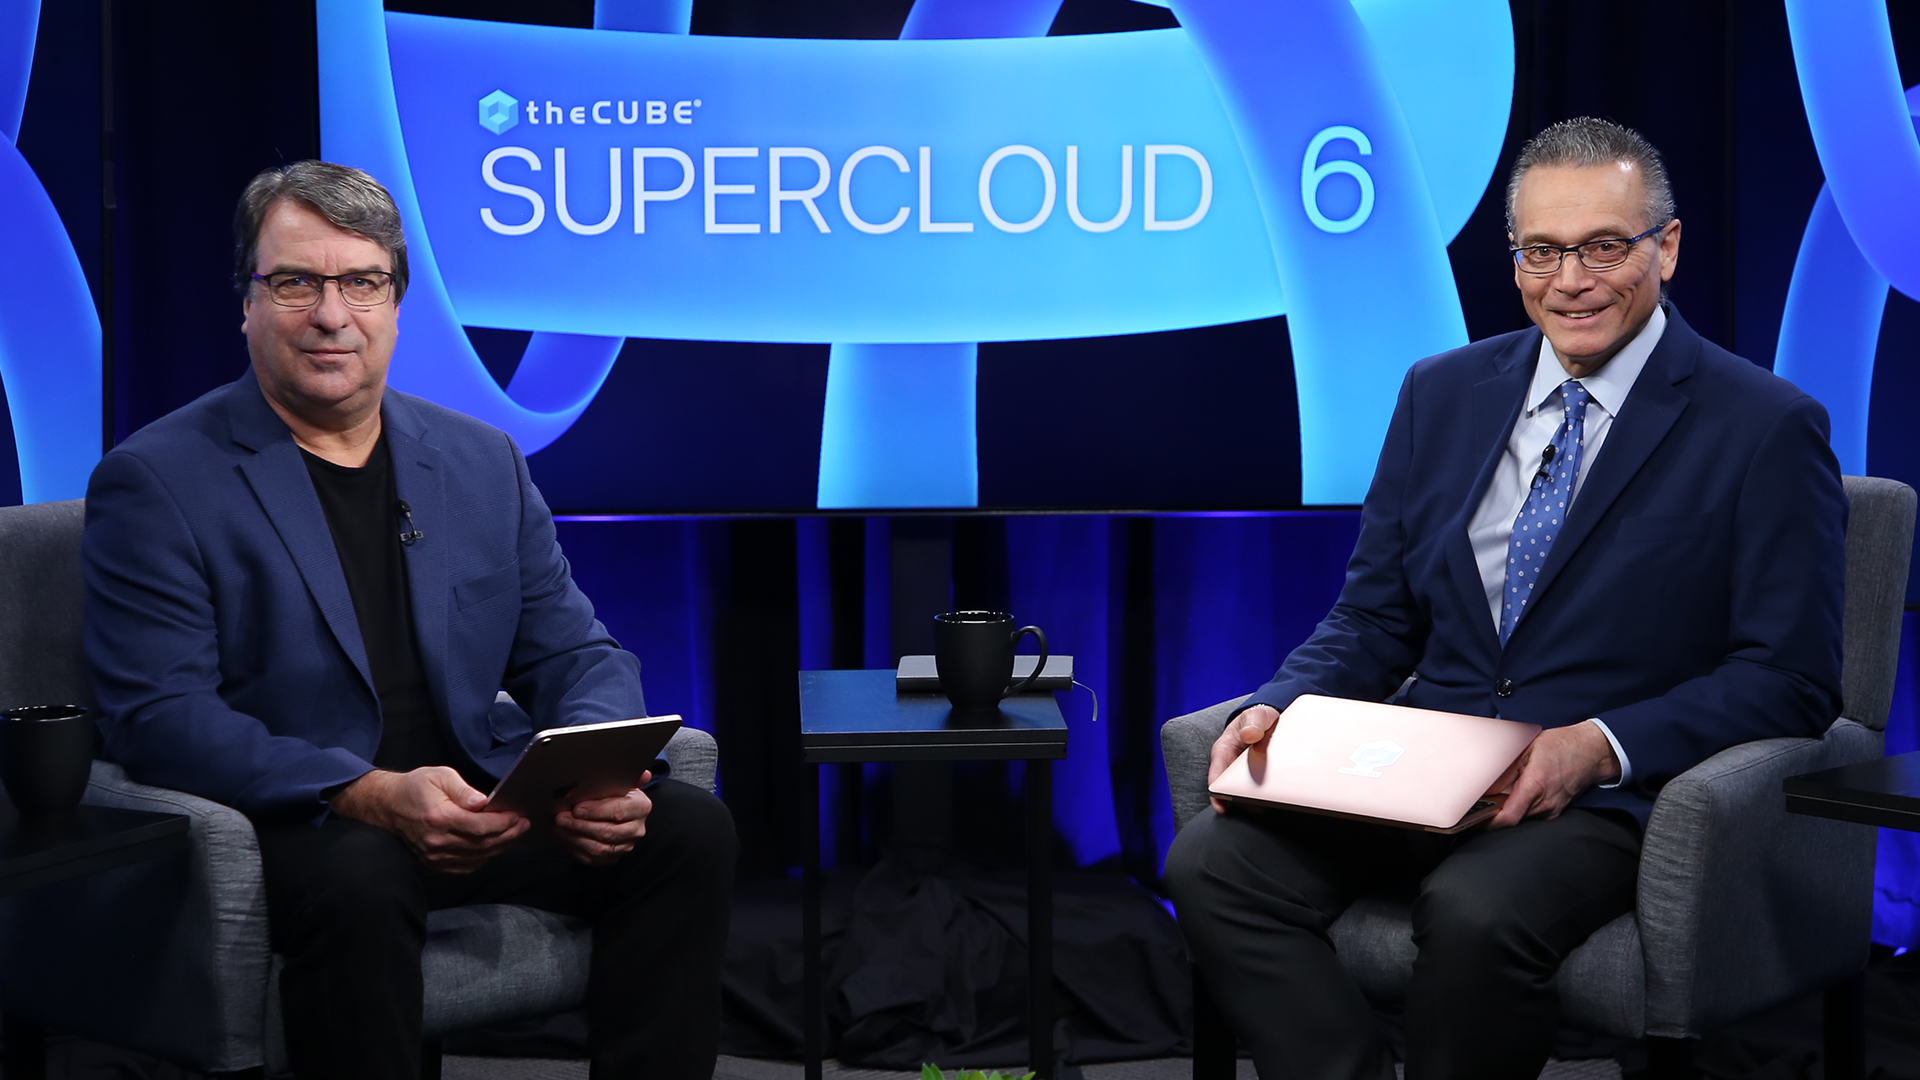 TheCUBE Research analysts Dave Vellante and John Furrier kick off the "Supercloud 6: AI Innovation" event. They discuss AI everywhere and AI innovators.